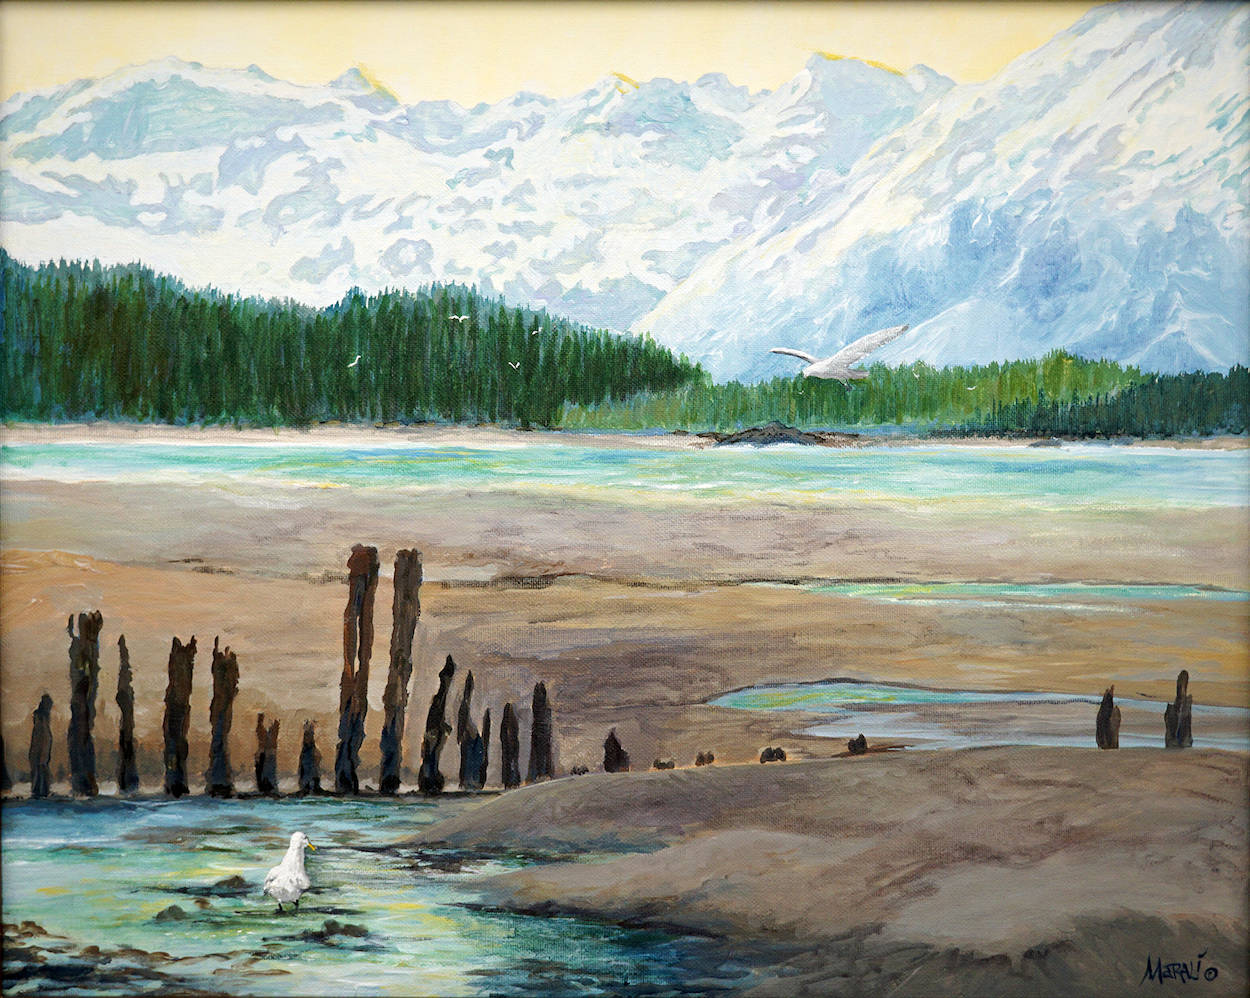 A painting from Marali Sergeant-Smith’s “A Sense of Place,” showing for the month of July 2019 at Ptarmigan Arts in Homer, Alaska. (Photo provided)